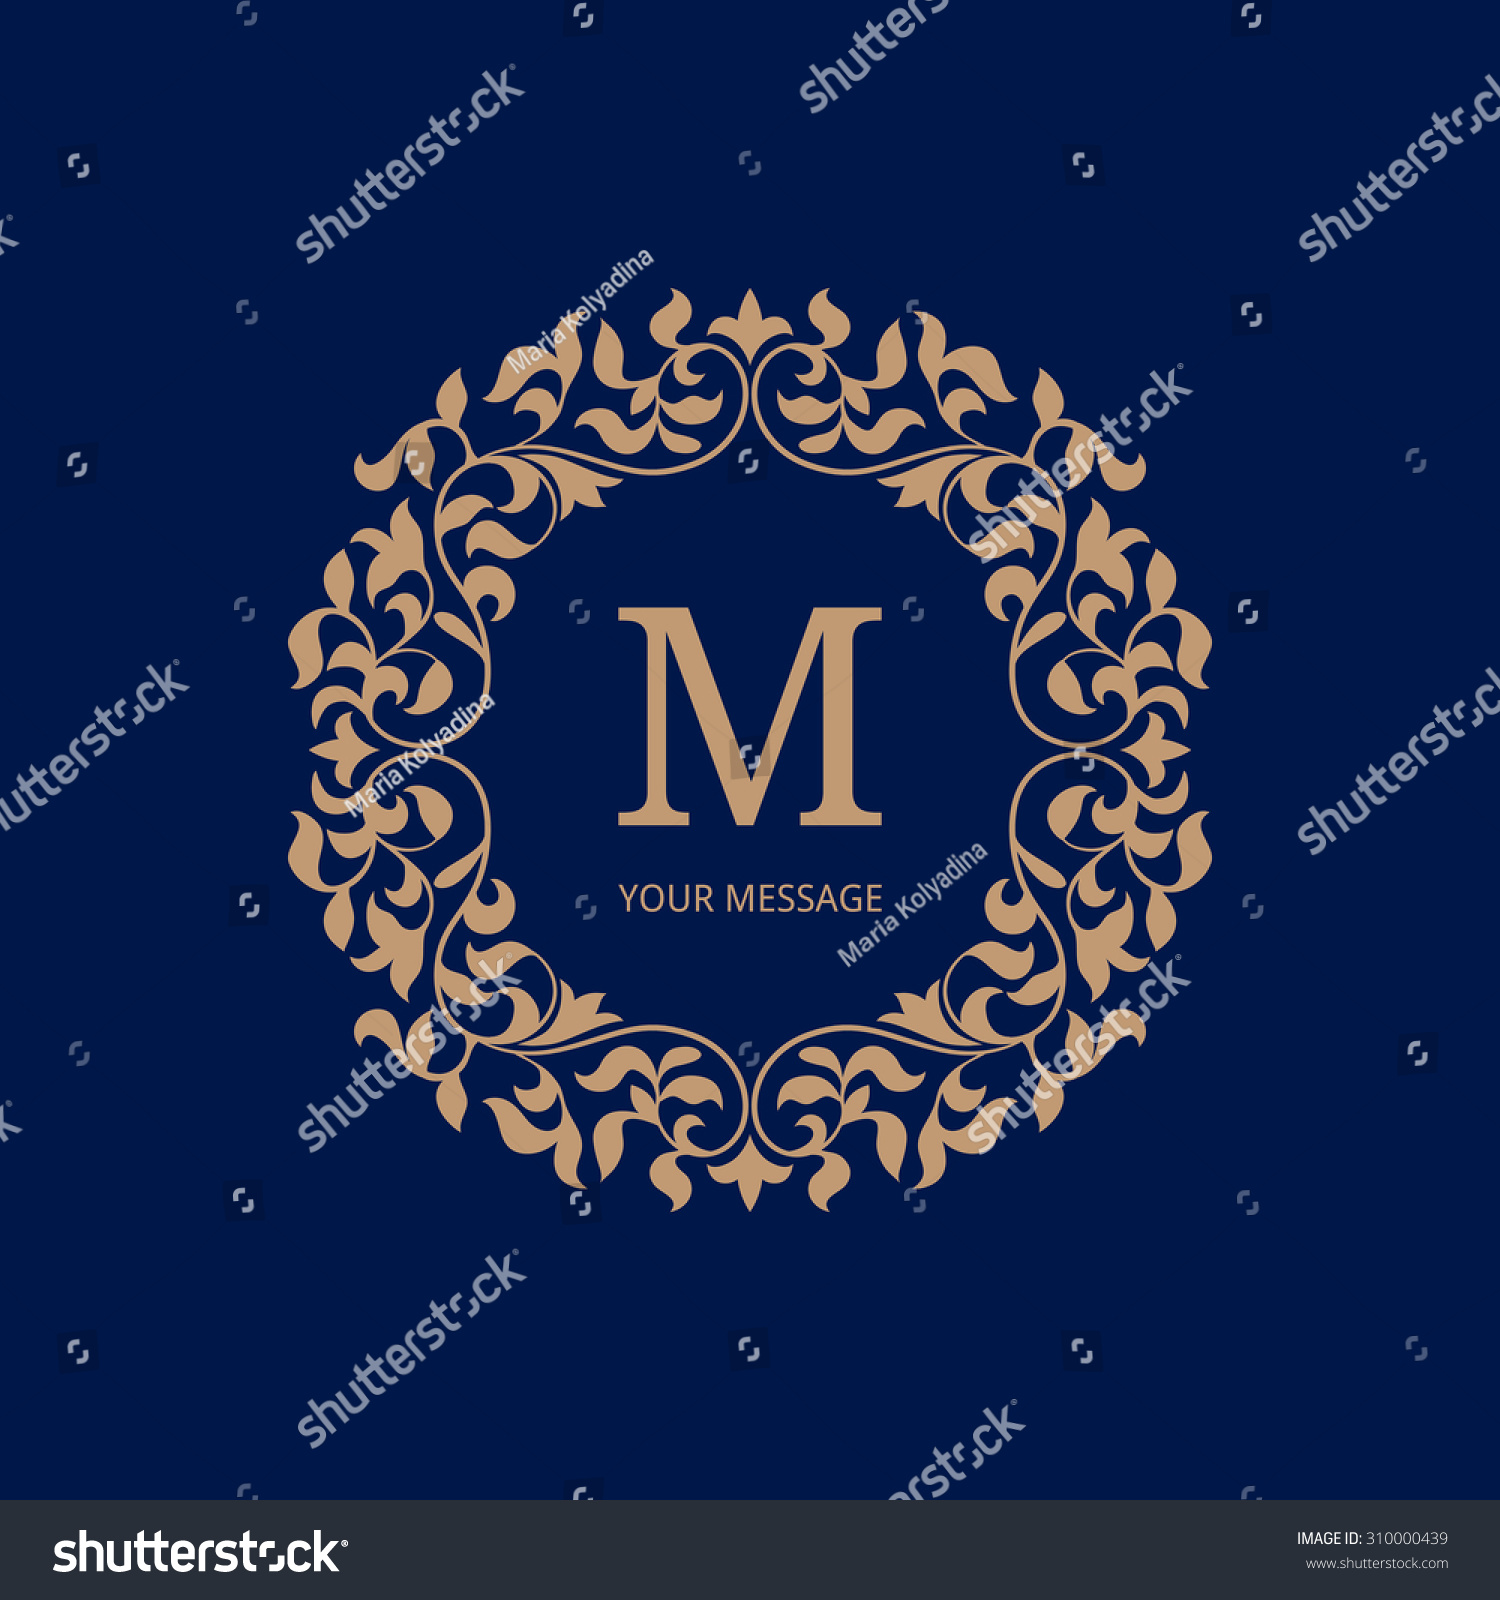 stock-vector-elegant-monogram-design-template-calligraphic-floral-ornament-can-be-used-for-label-and-310000439.jpg